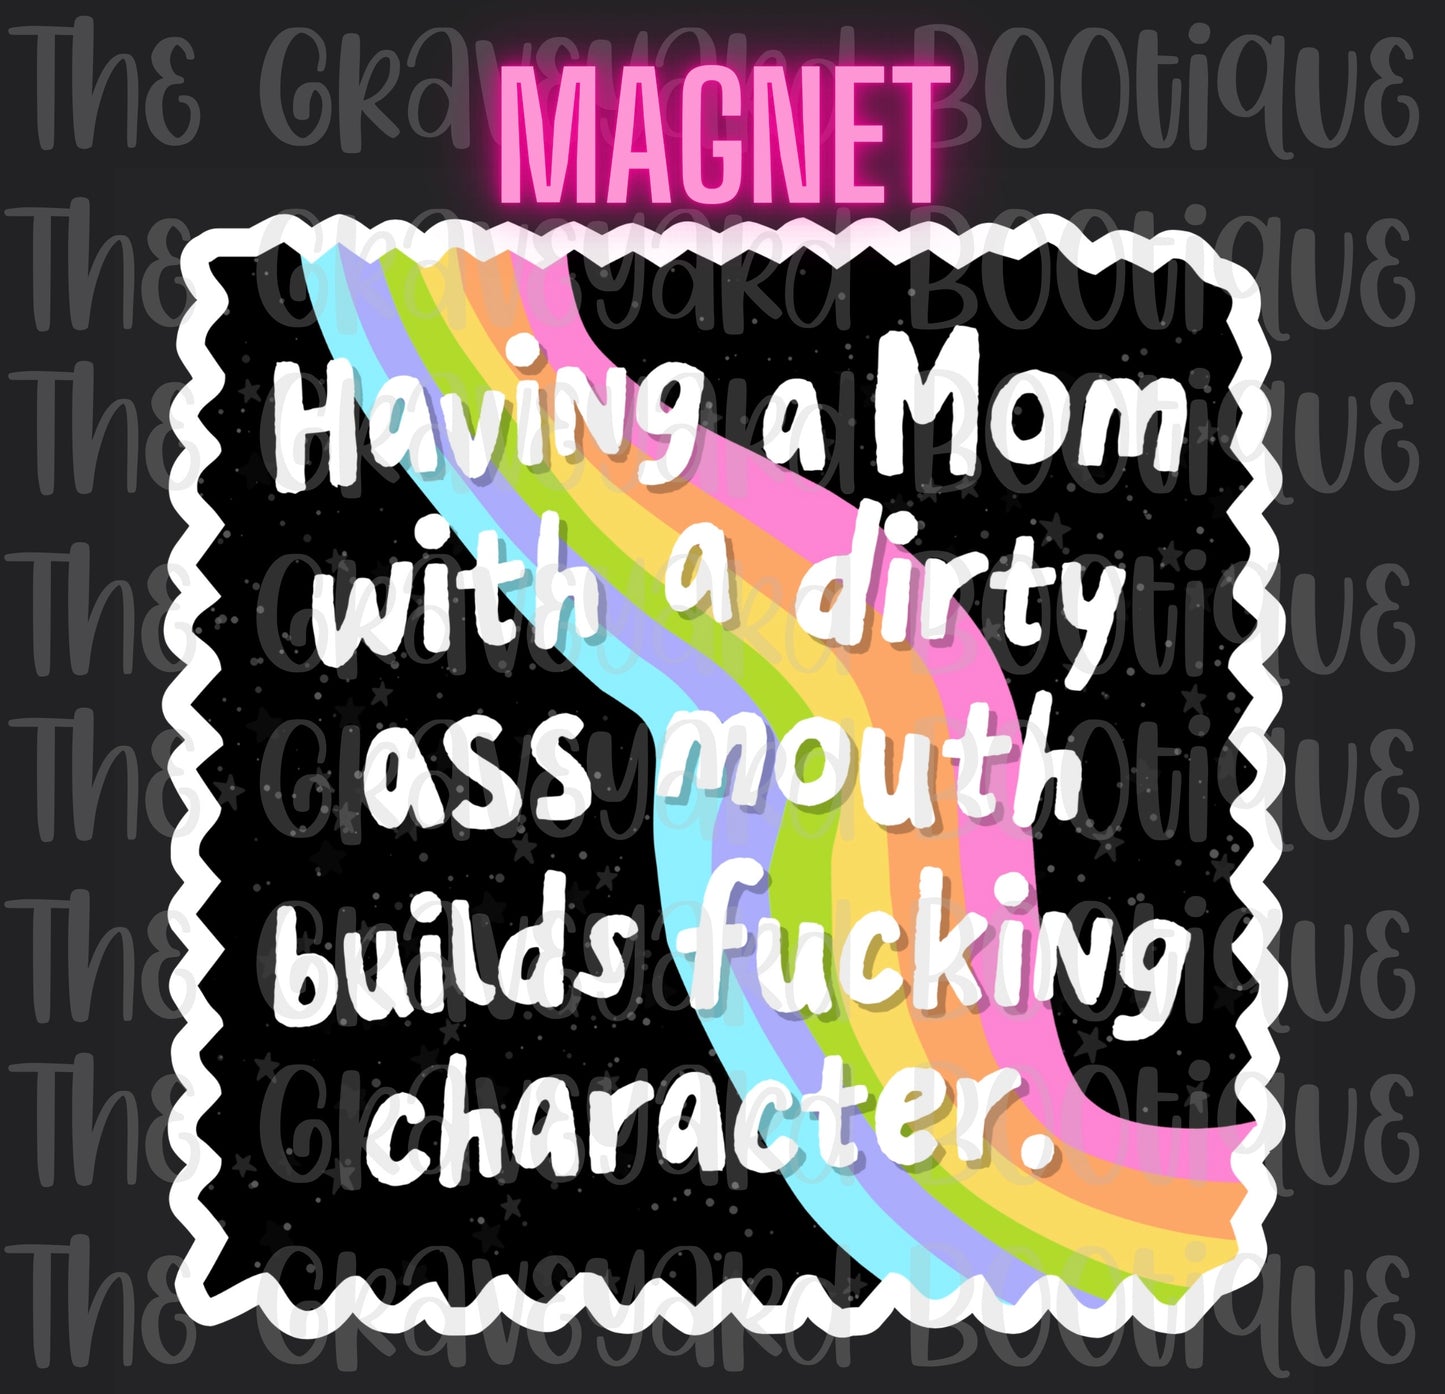 Having A Mom With A Dirty A*s Mouth Builds Fuc*ing Character Magnet